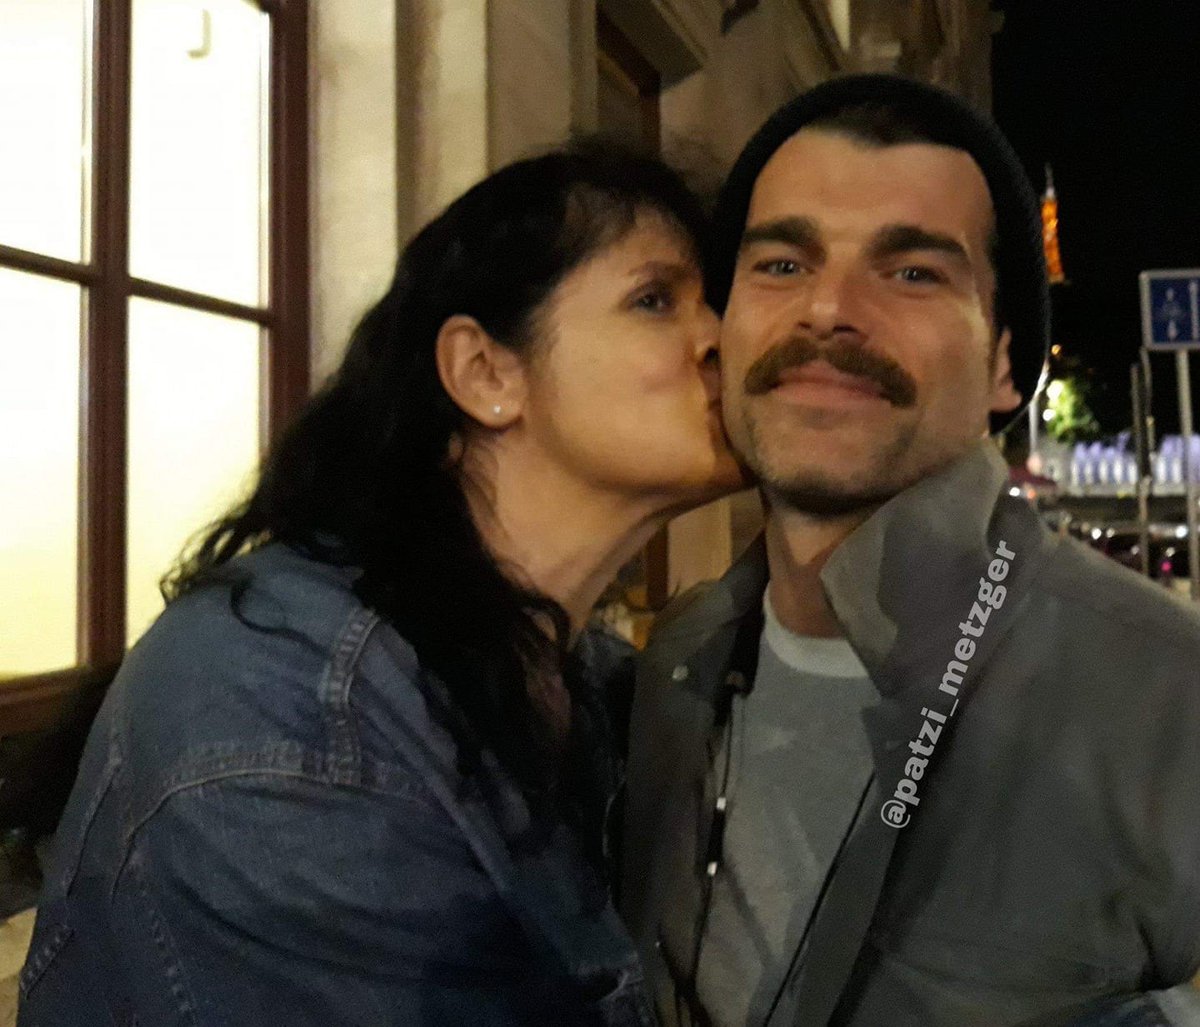 @beachcrazy70 @OutlandishScot @stanleyweber Yes, he is. Here you can see it. It's him with me, his admin. We met in Lyon some years ago.